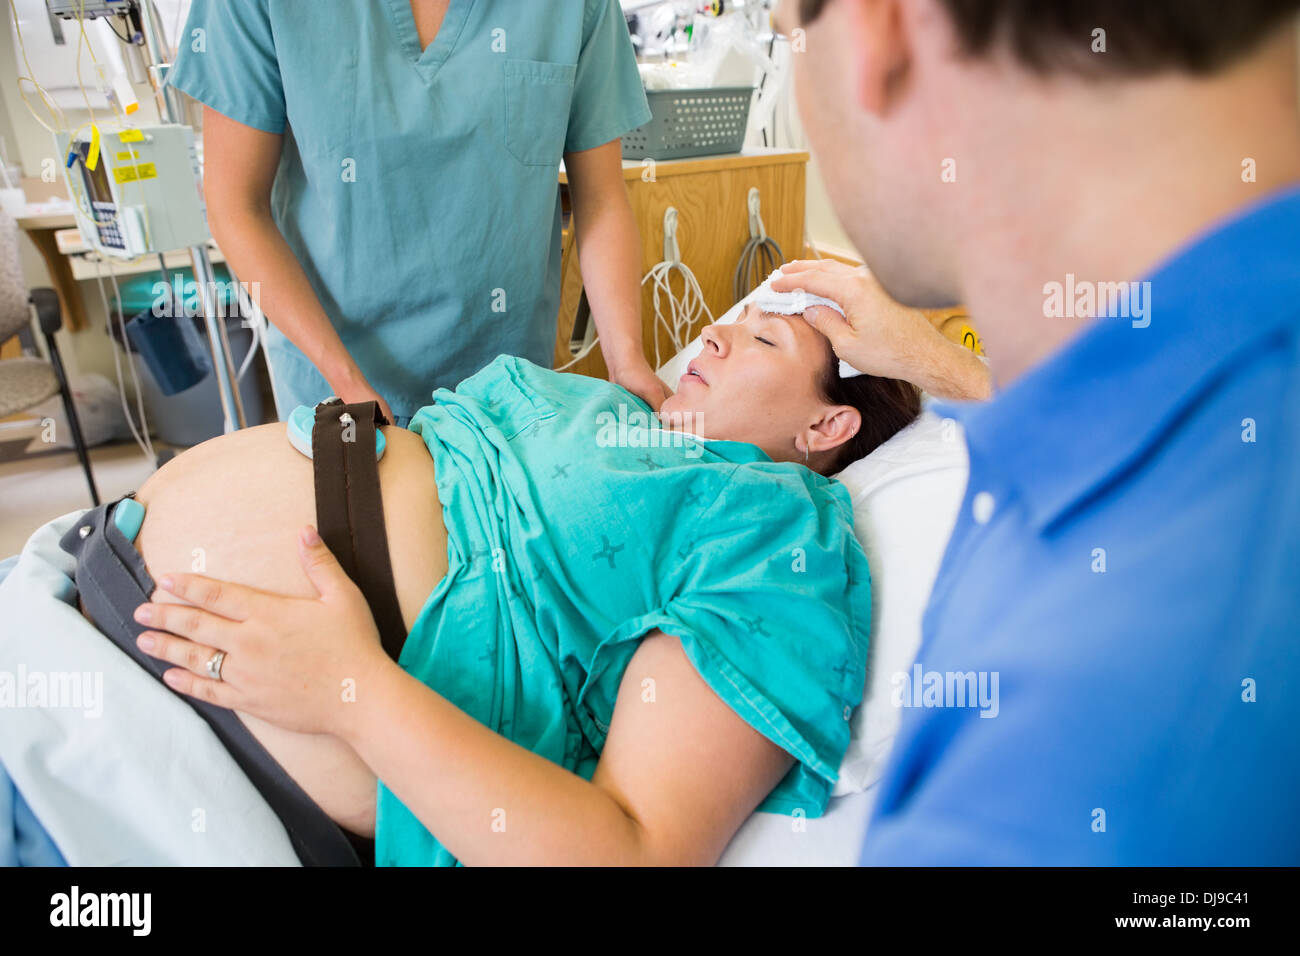 Loving Husband Wiping Pregnant Wife's Forehead Stock Photo